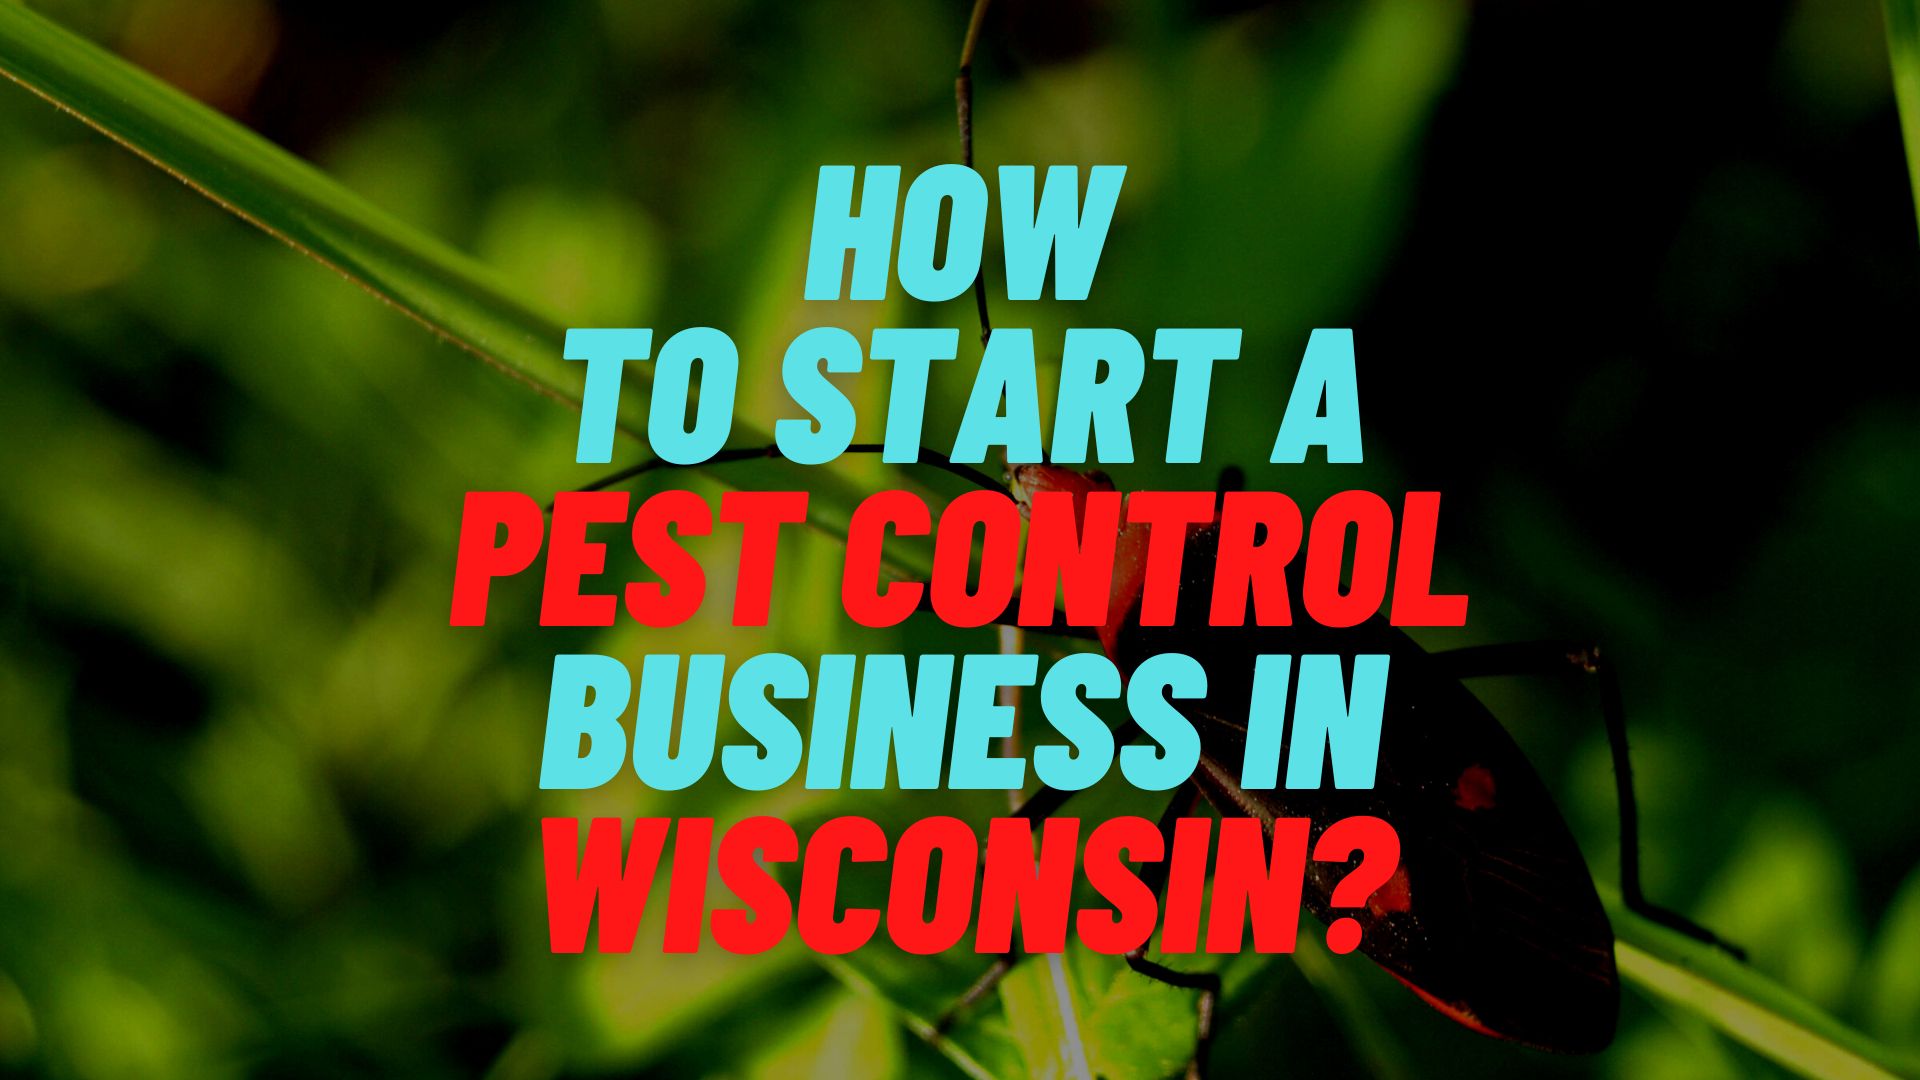 How to start a pest control business in Wisconsin?